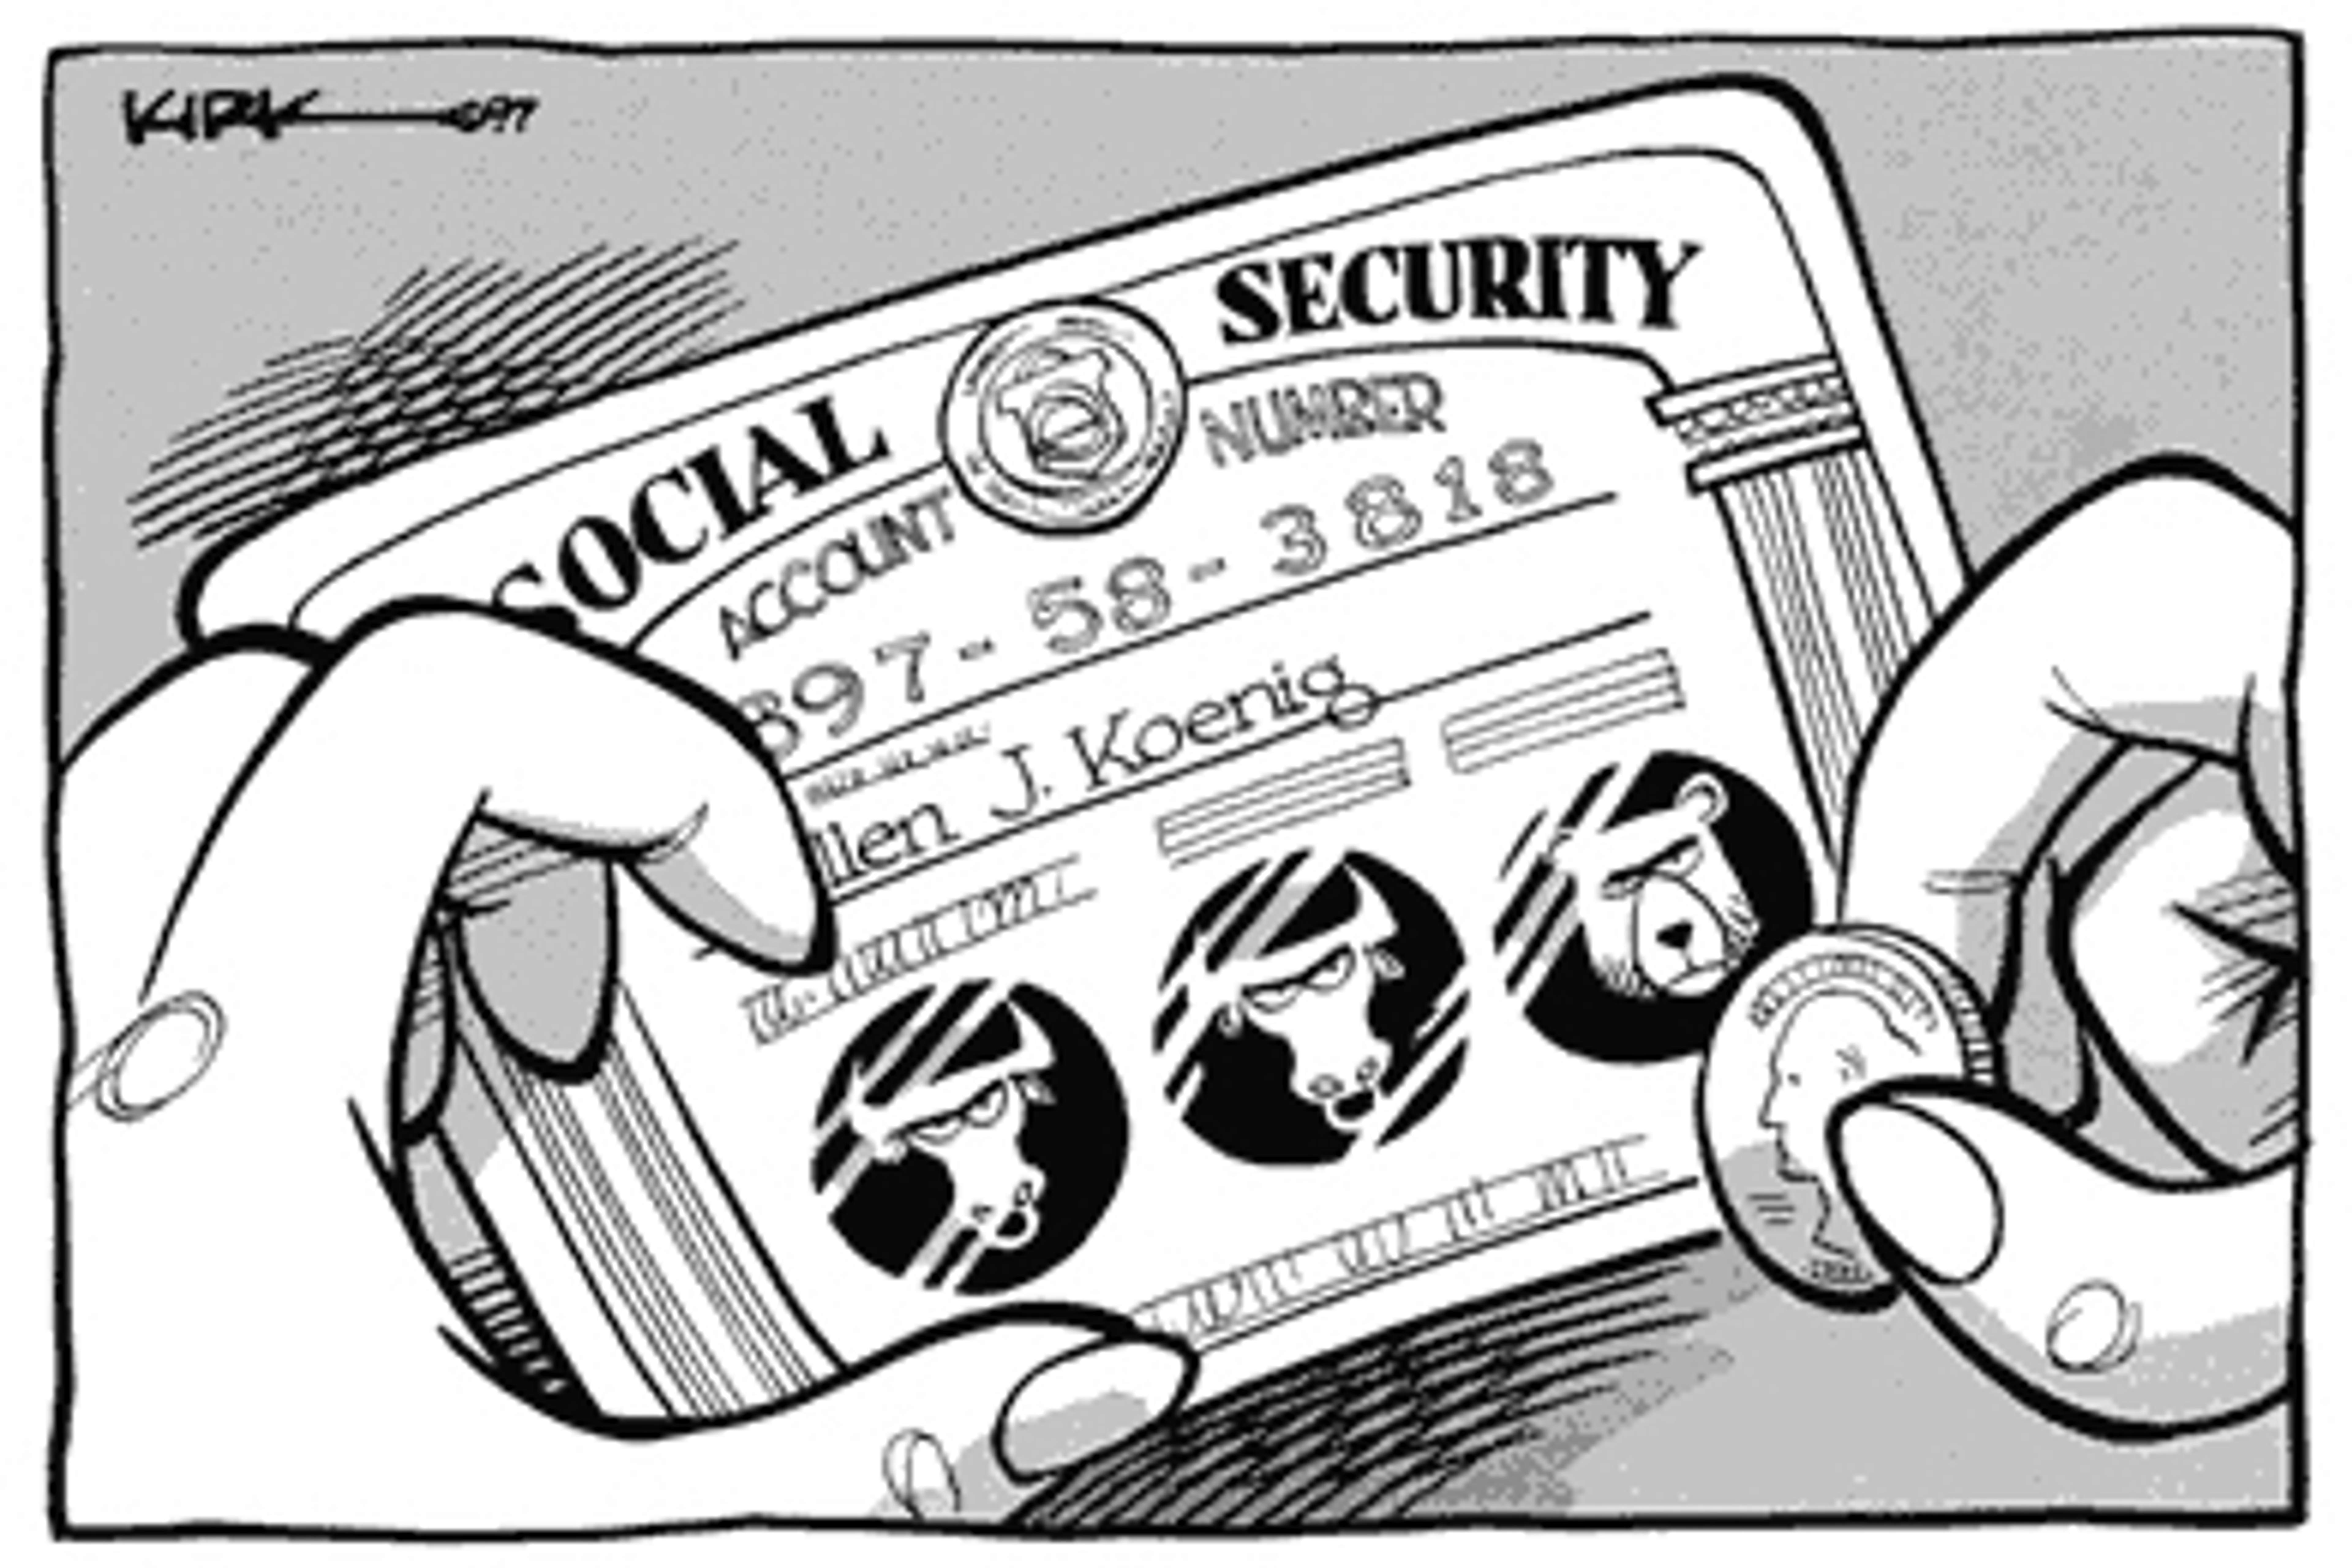 Illustration of a social security card